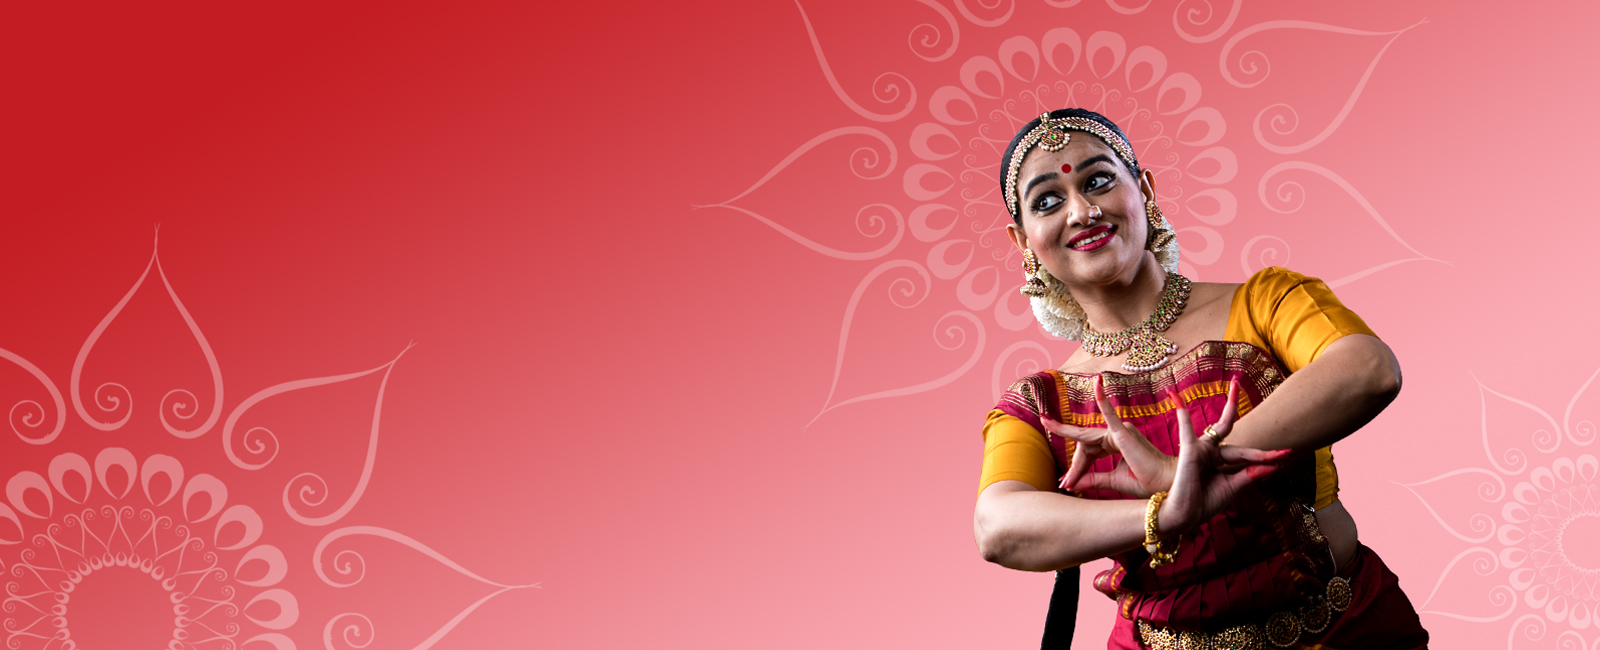 online bharatanatyam classes from a leading dance school